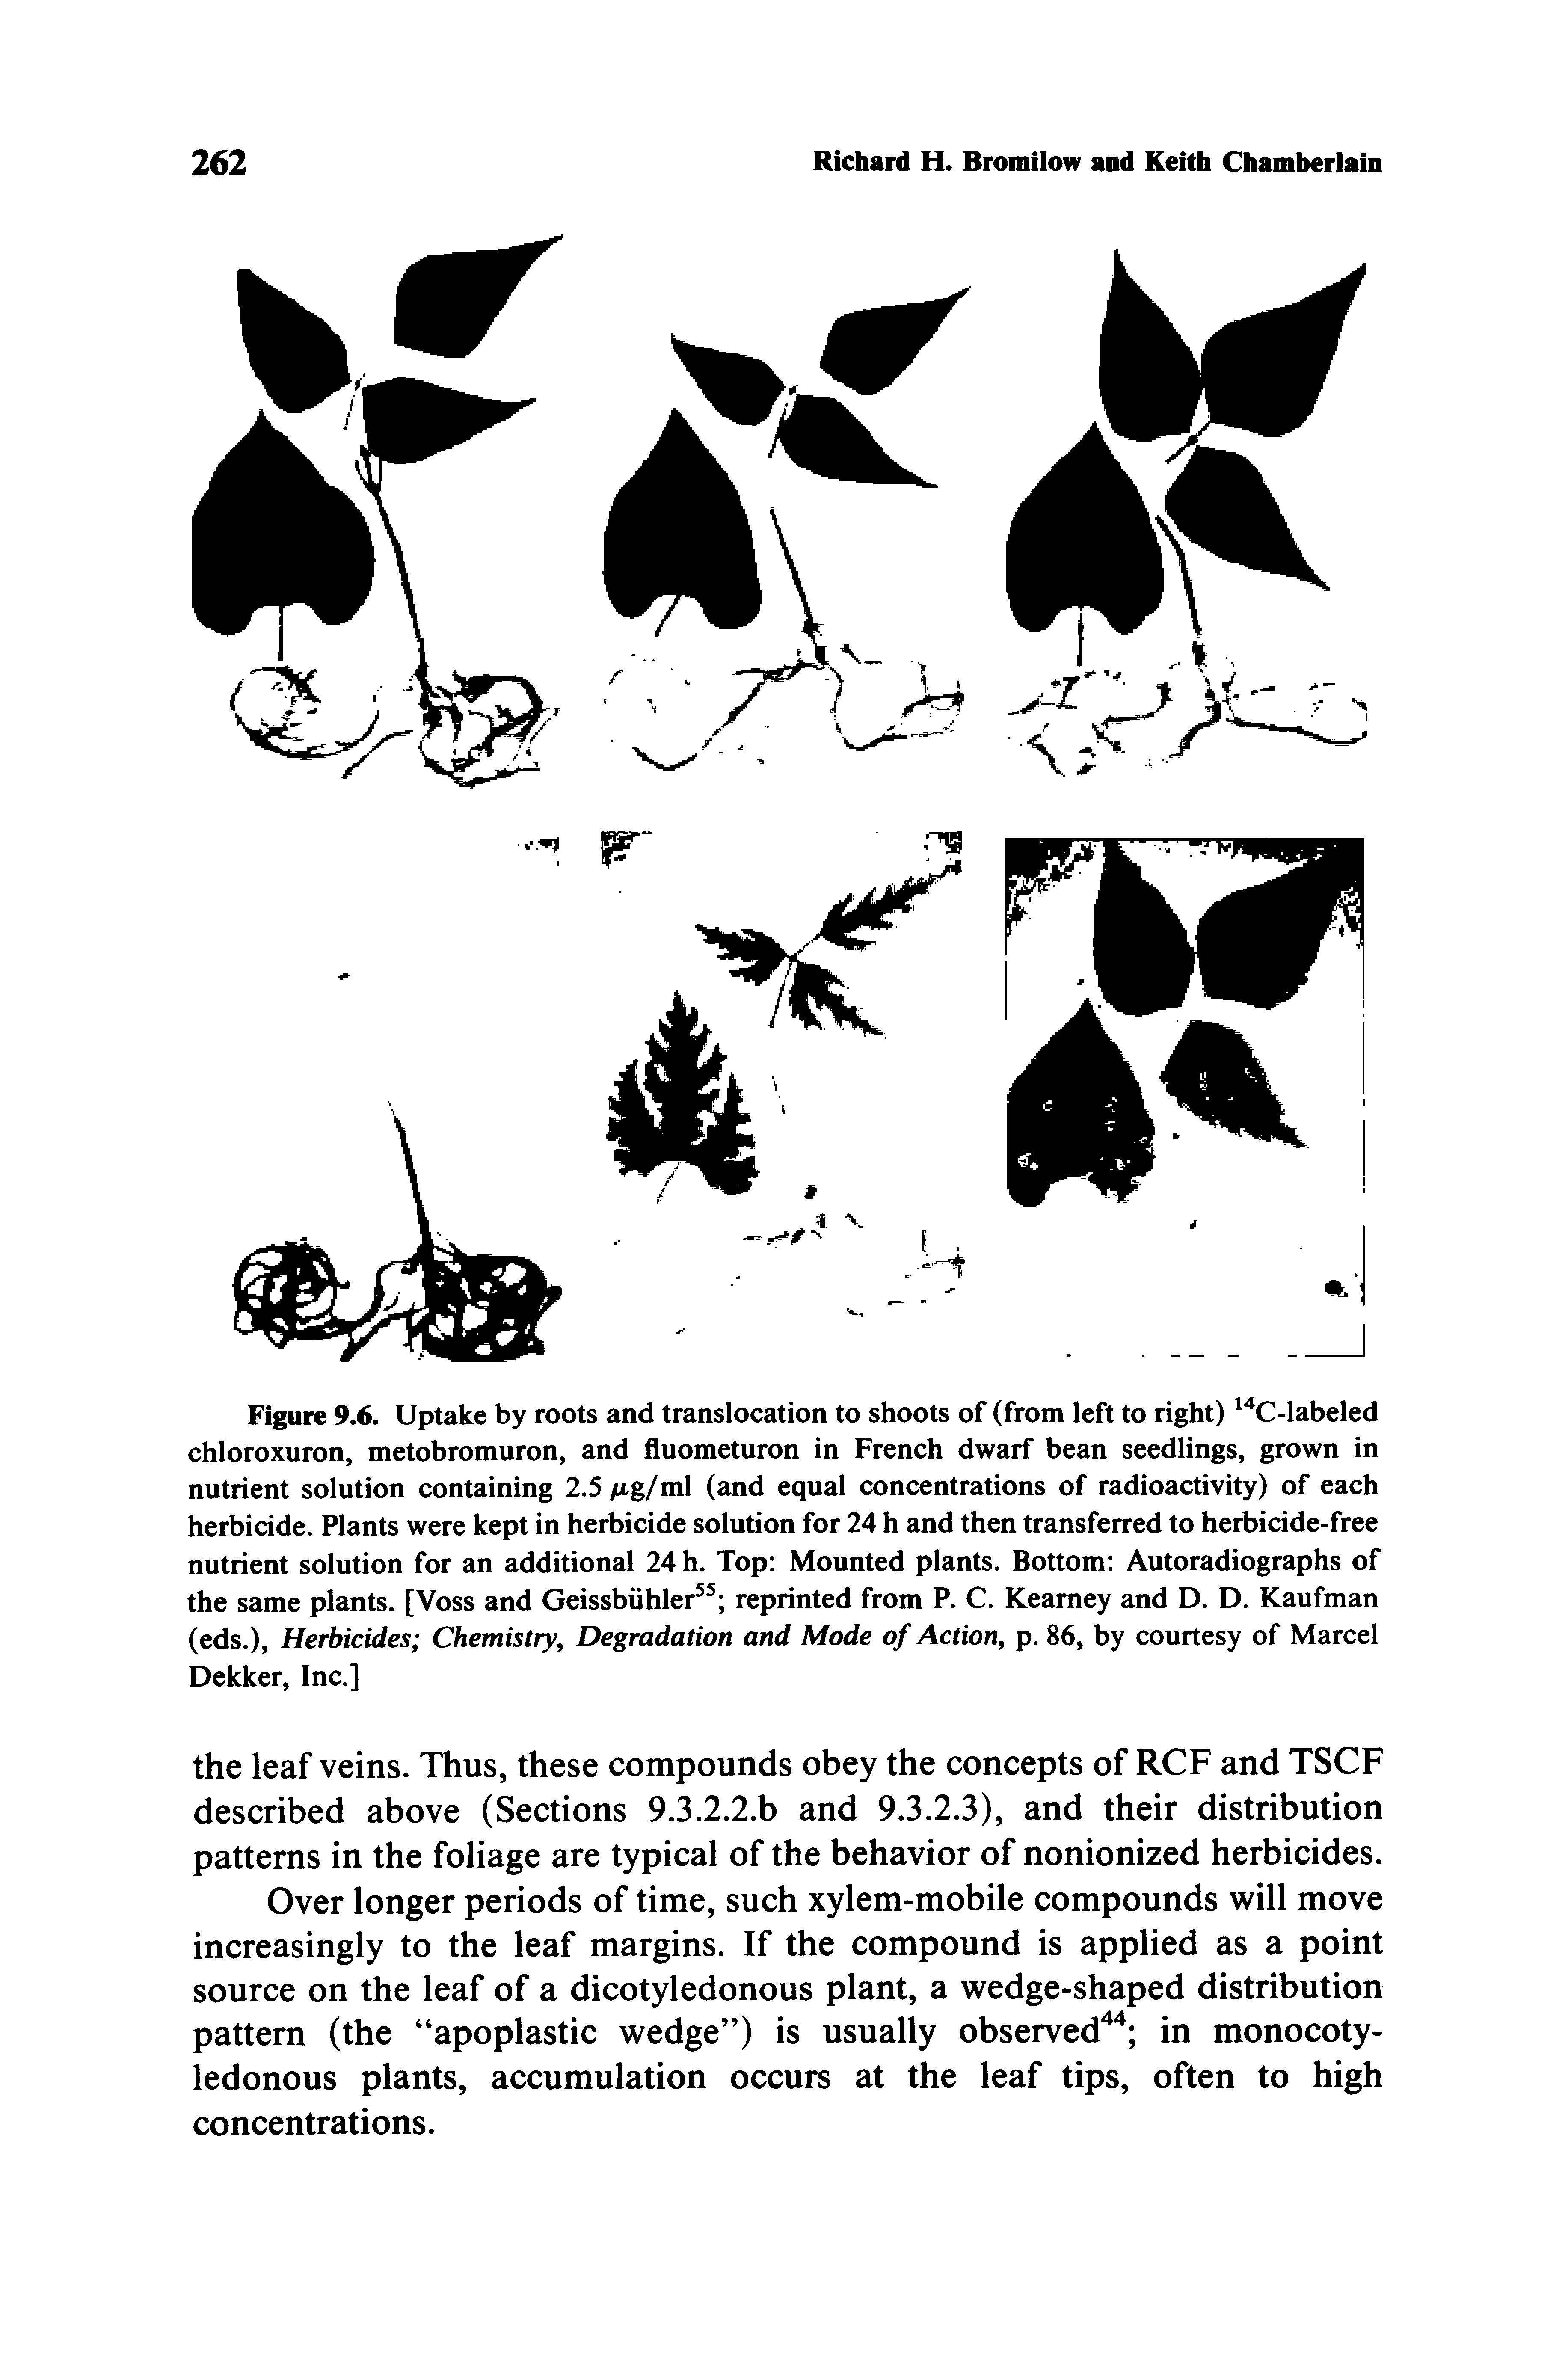 Figure 9.6. Uptake by roots and translocation to shoots of (from left to right) " C-labeled chloroxuron, metobromuron, and iluometuron in French dwarf bean seedlings, grown in nutrient solution containing 2.5 Mg/ml (and equal concentrations of radioactivity) of each herbicide. Plants were kept in herbicide solution for 24 h and then transferred to herbicide-free nutrient solution for an additional 24 h. Top Mounted plants. Bottom Autoradiographs of the same plants. [Voss and Geissbiihler reprinted from P. C. Kearney and D. D. Kaufman (eds.), Herbicides Chemistry, Degradation and Mode of Action, p. 86, by courtesy of Marcel Dekker, Inc.]...